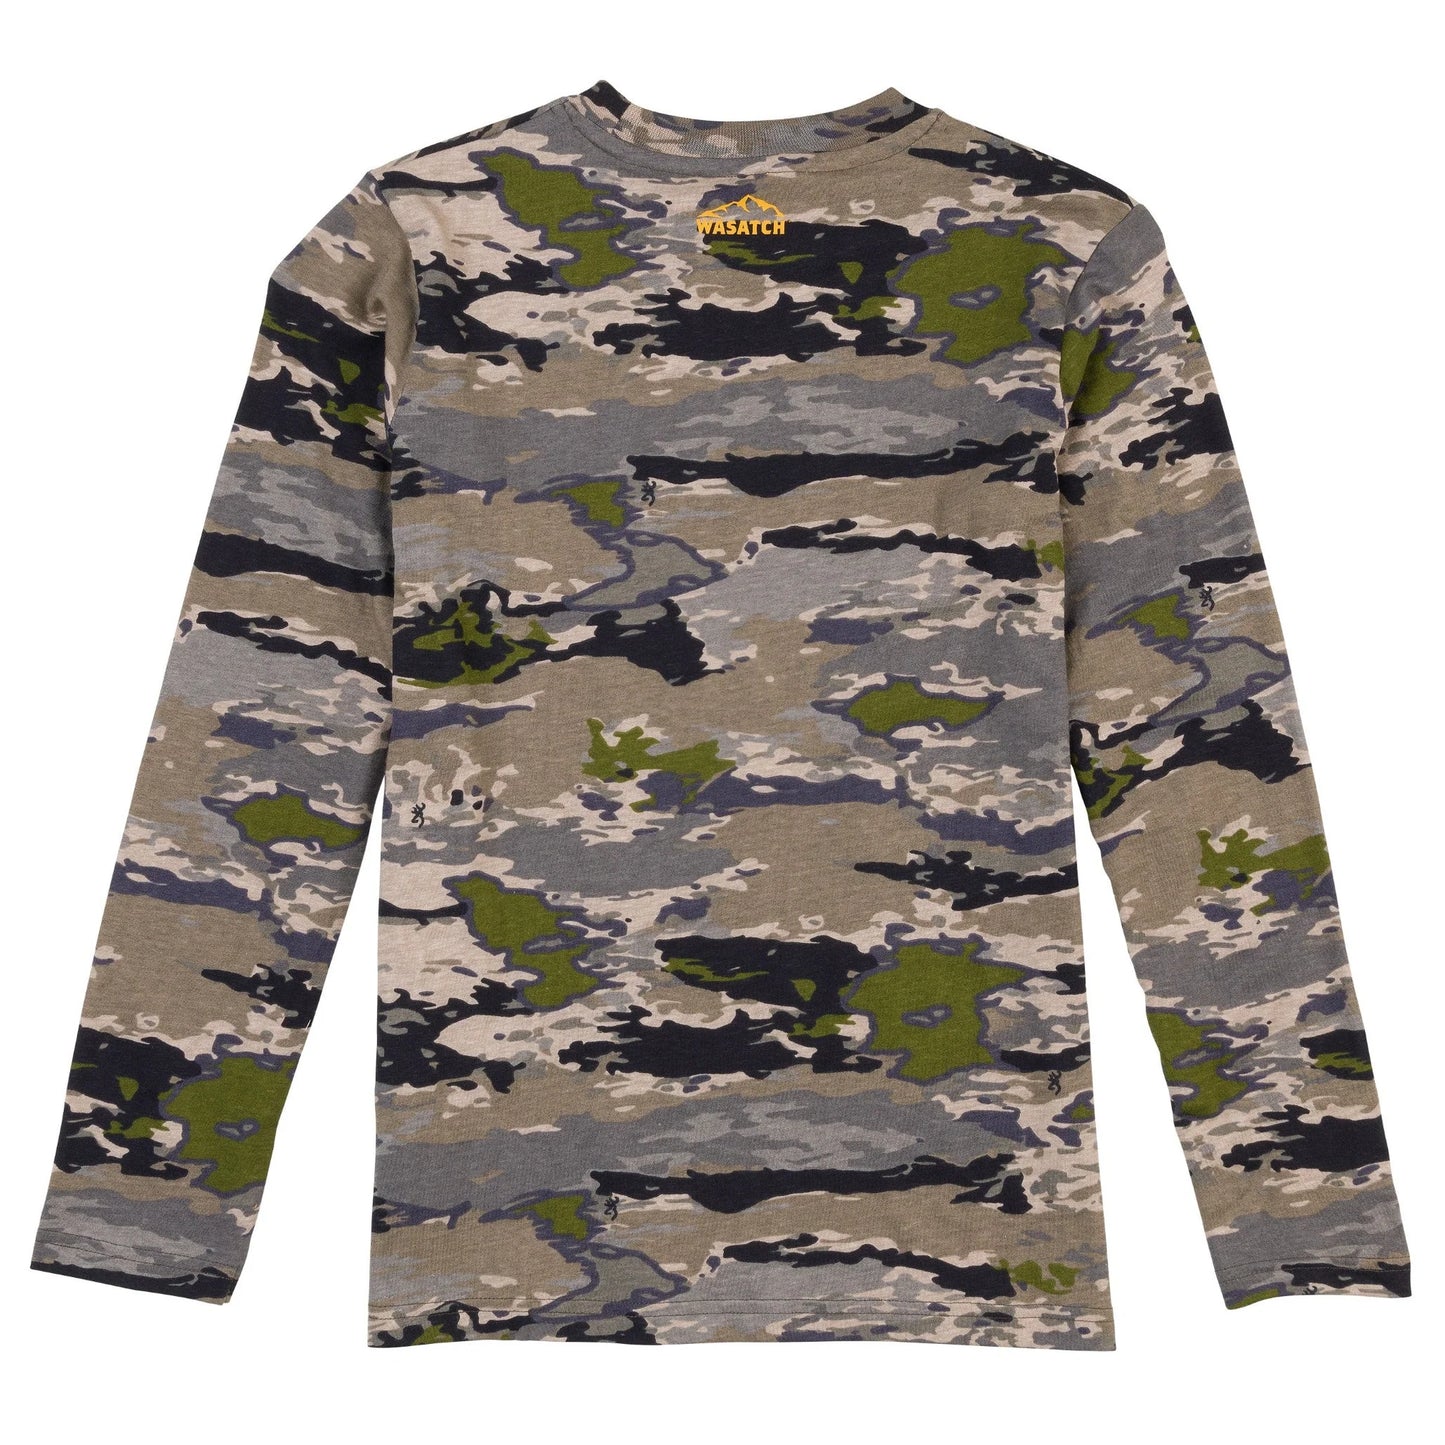 BROWNING Wasatch Kid's Long Sleeve T-Shirt